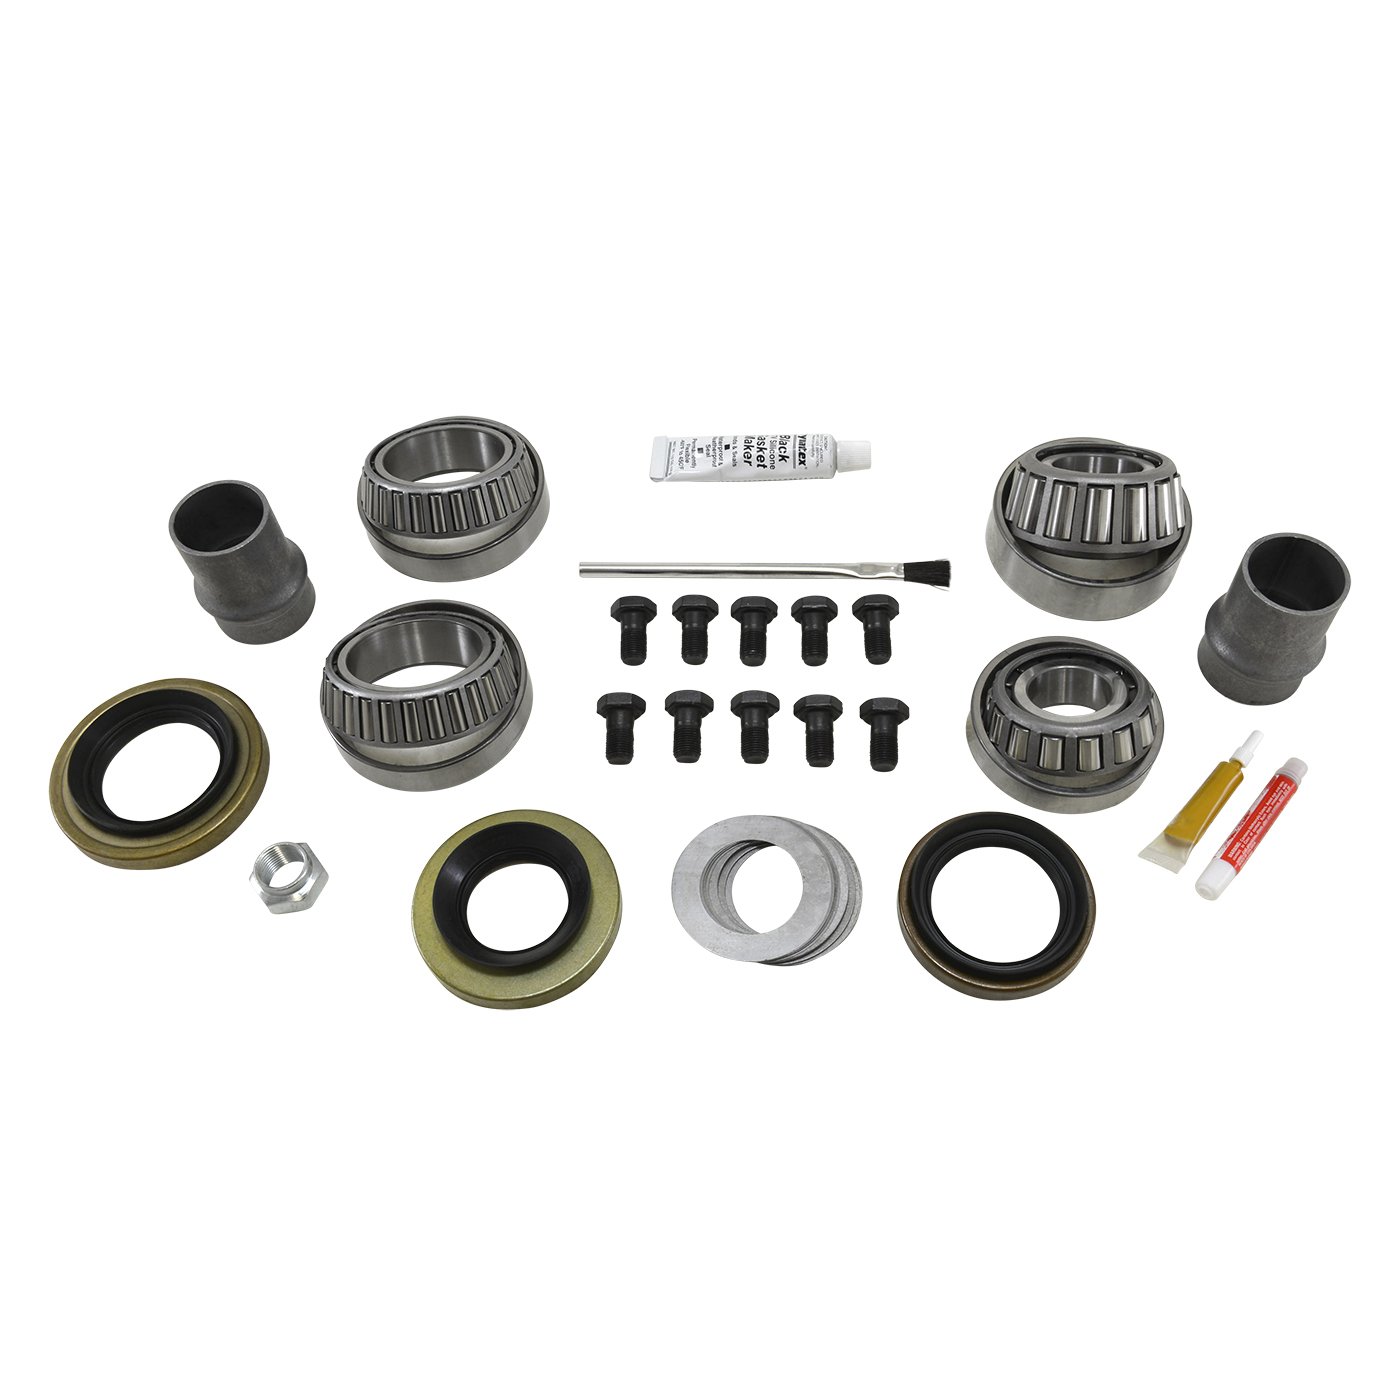 USA Standard ZK T7.5-REV Master Overhaul Kit, For Toyota 7.5 in. Ifs, For T100, Tacoma And Tundra